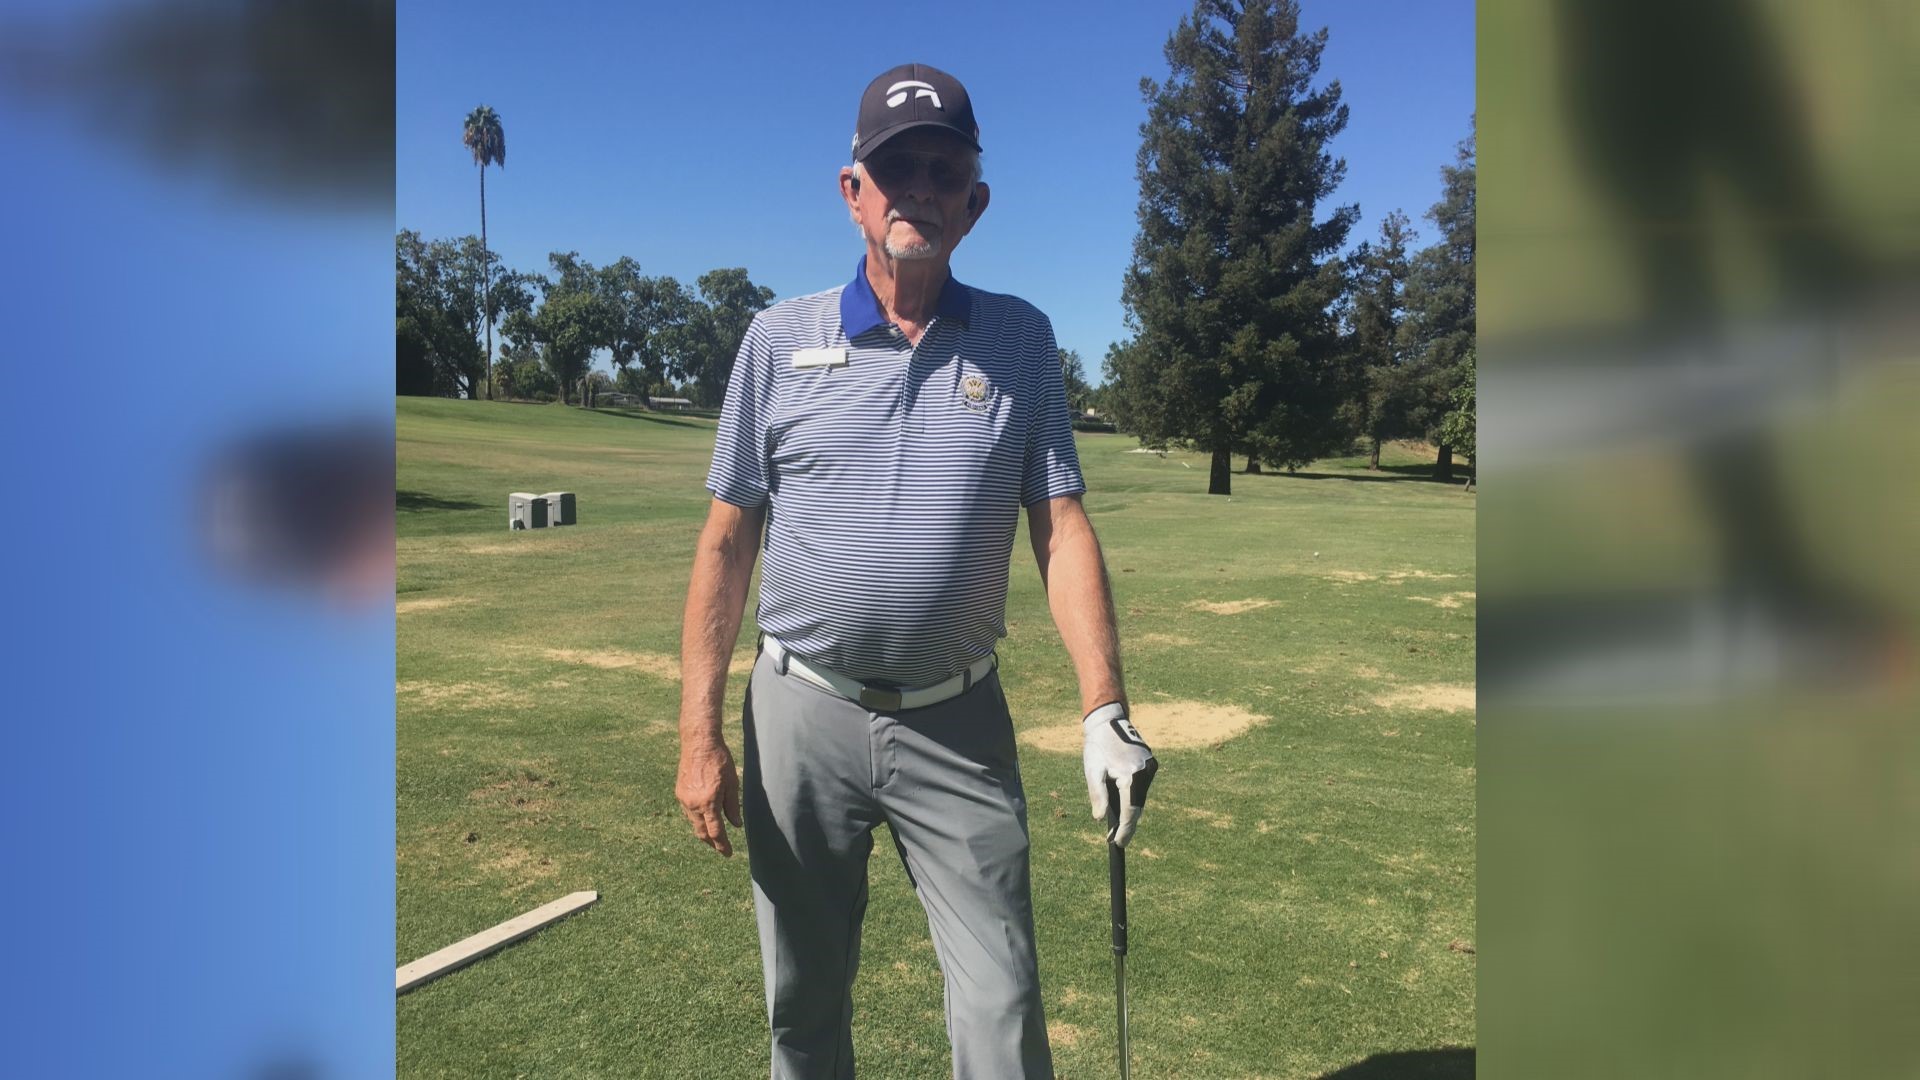 At 77-years-old, Will Harris is now the oldest golfer to earn membership in the PGA. And he did it on his very first try!